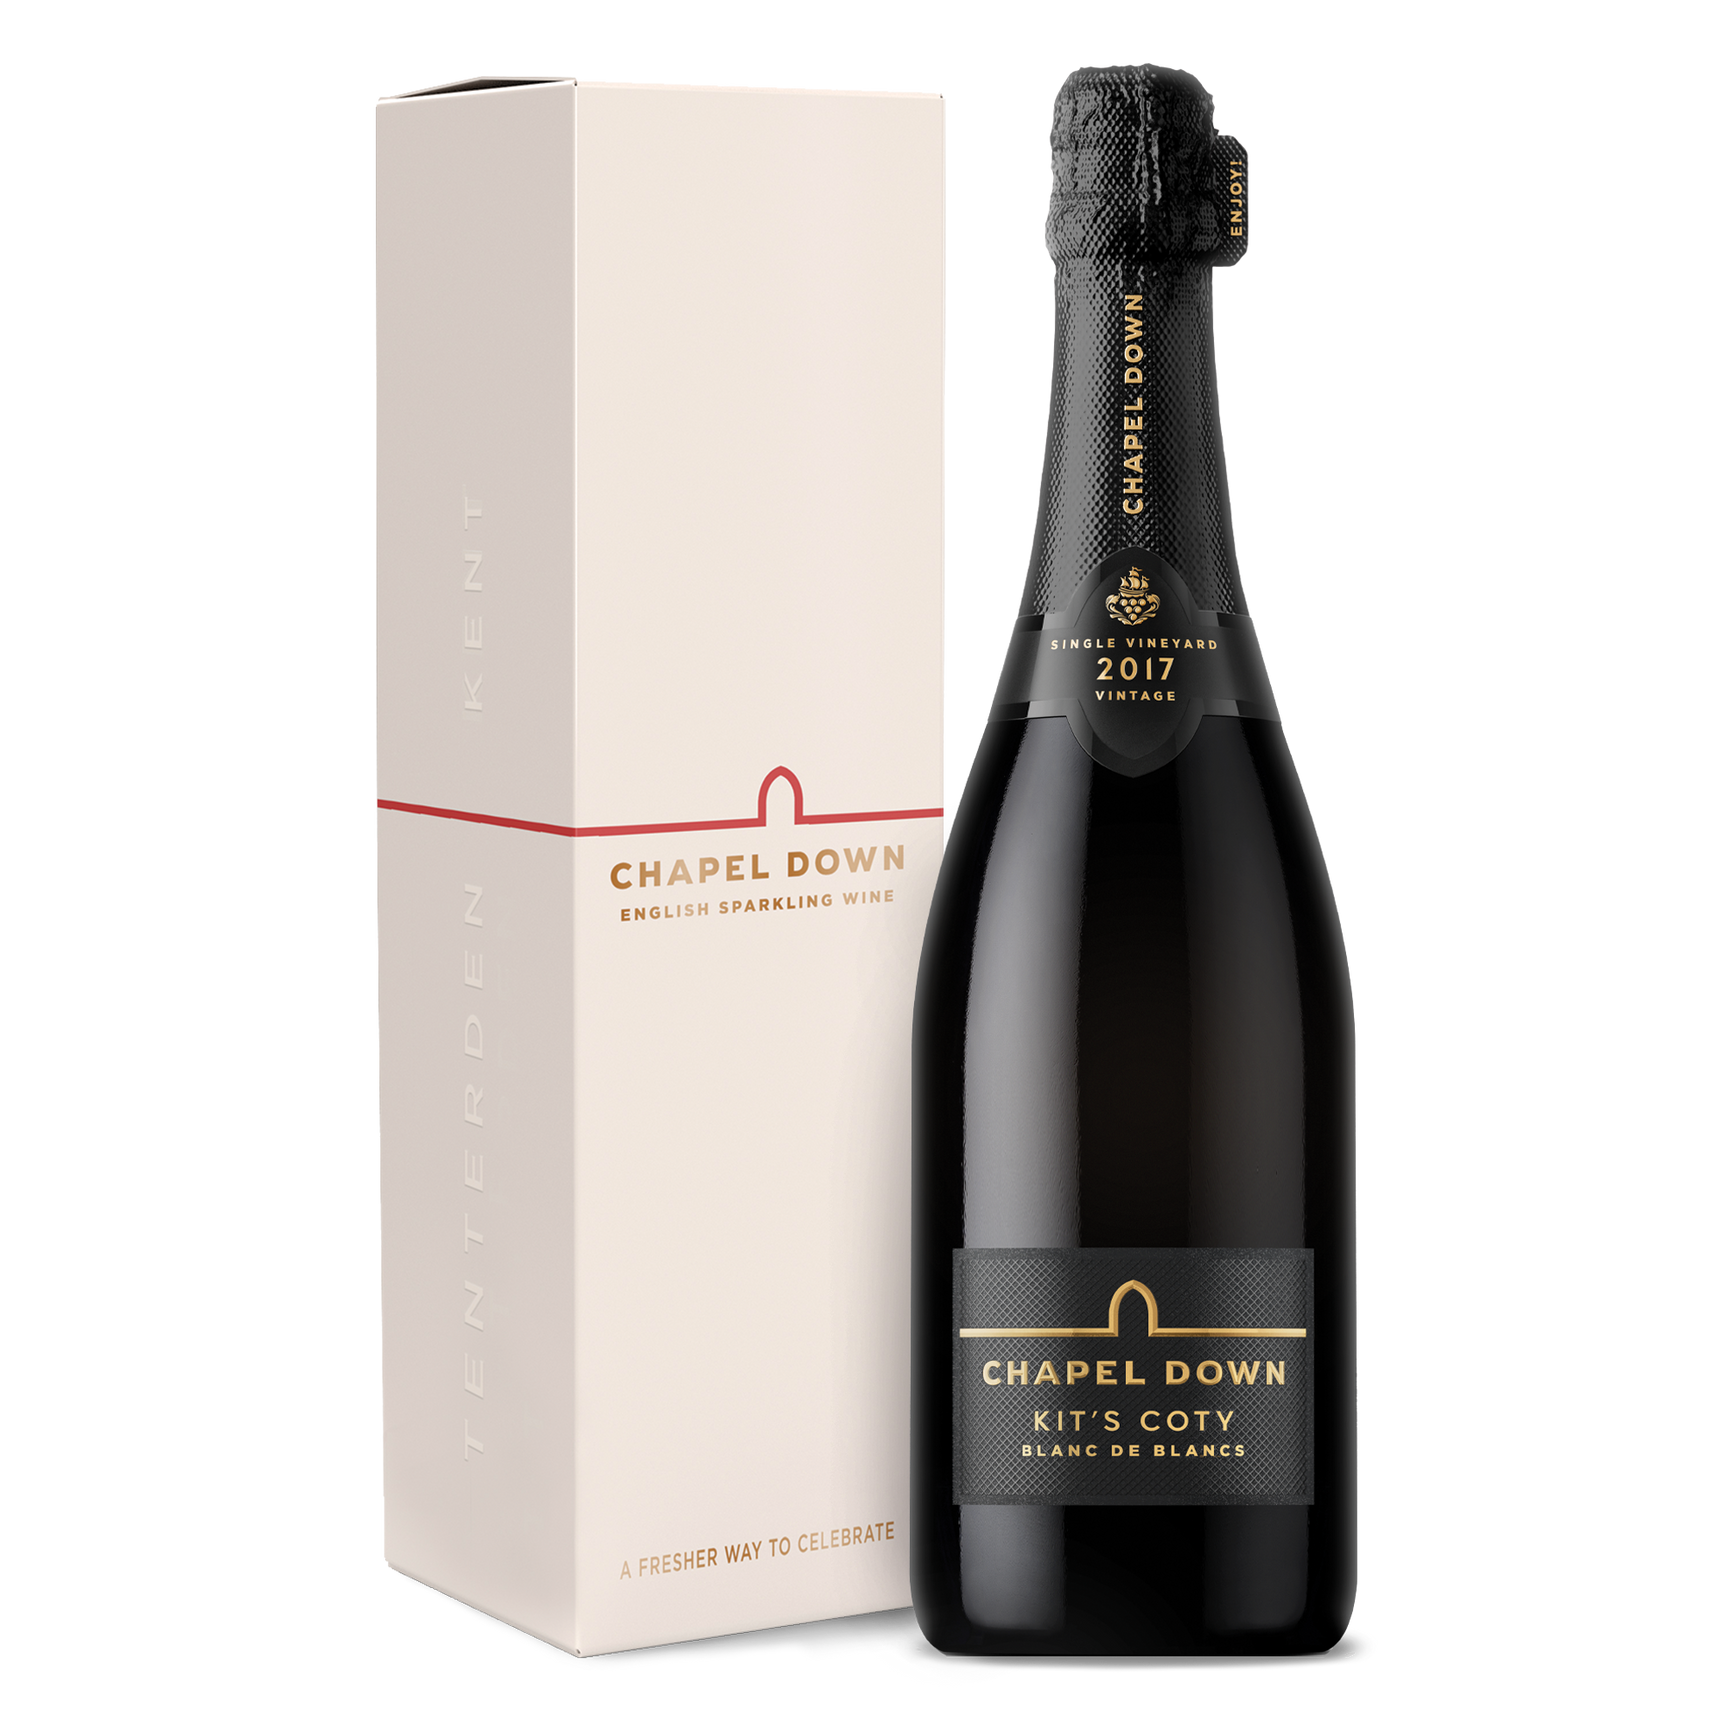 Kit's Coty Coeur de Cuvée 2016 and Gift Box